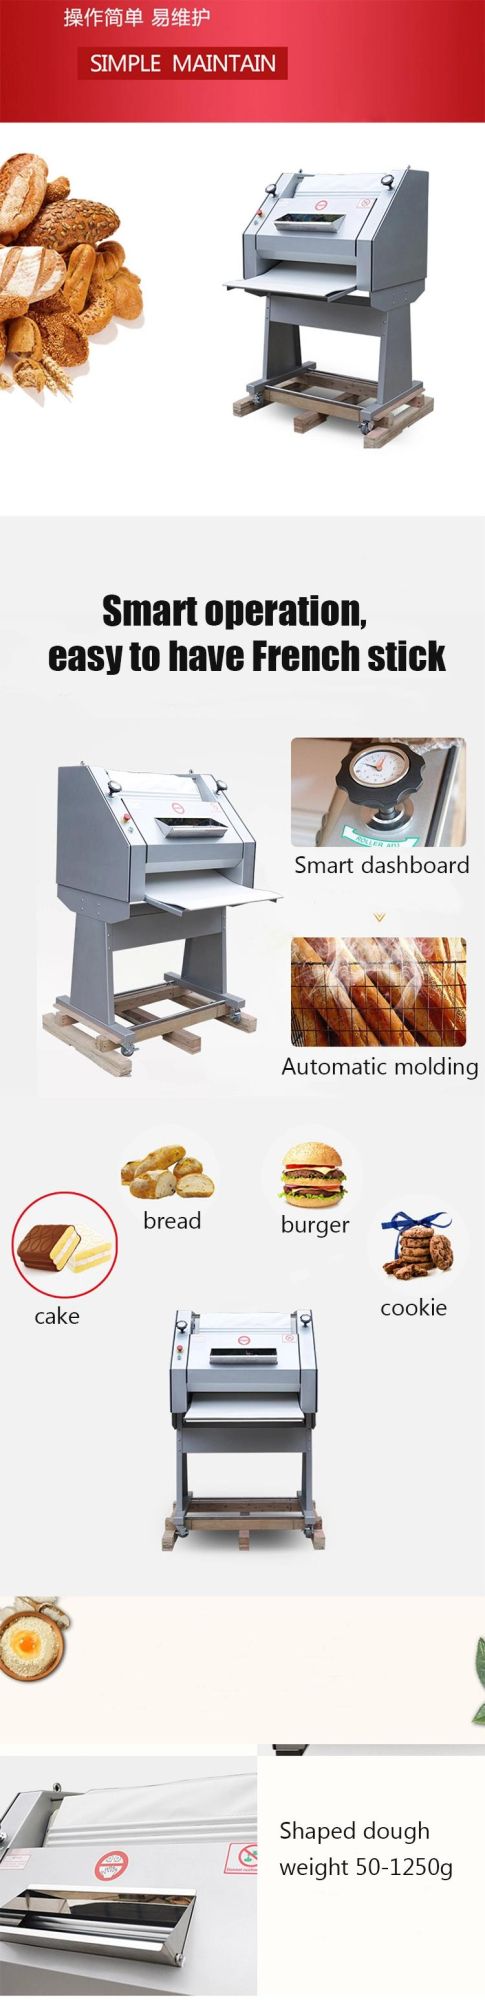 French Baguette Factory Machines French Baguette Bread Rolling Machine French Baguette Bread Making Machine